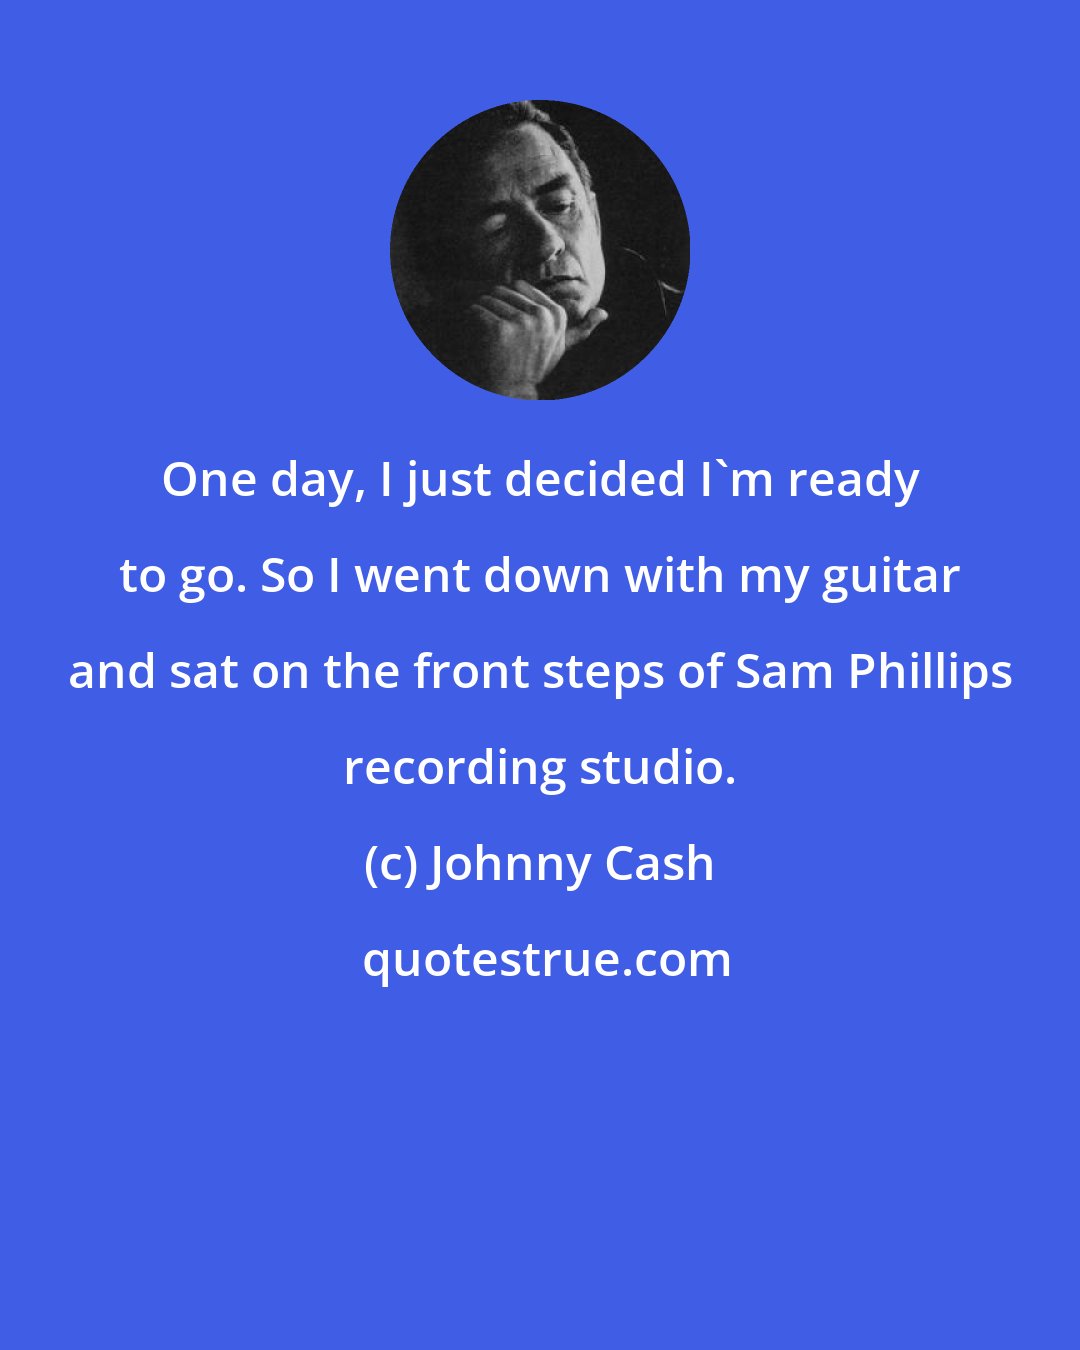 Johnny Cash: One day, I just decided I'm ready to go. So I went down with my guitar and sat on the front steps of Sam Phillips recording studio.